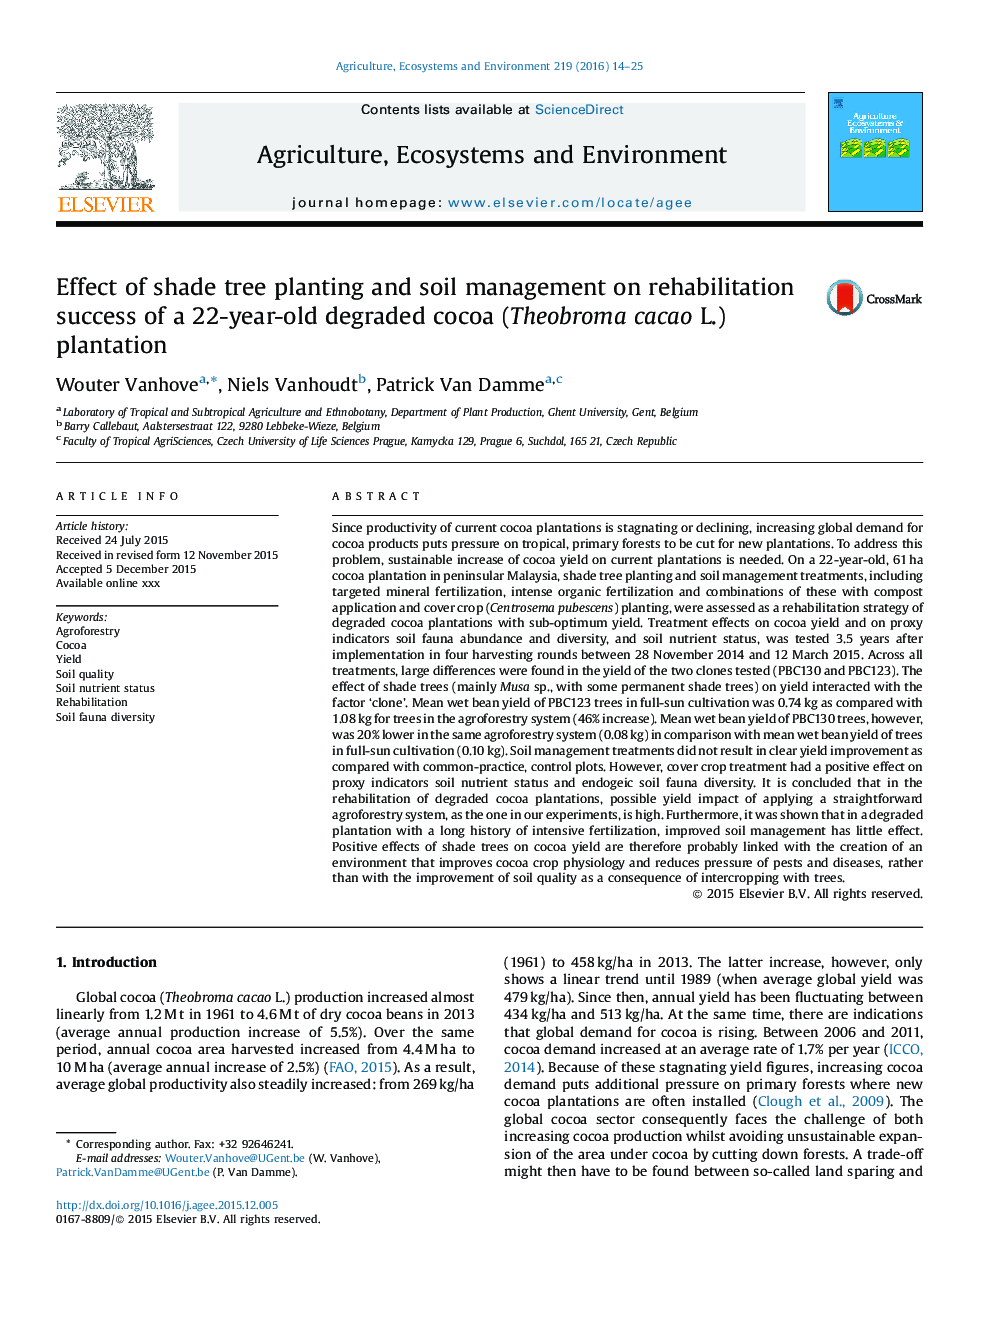 Effect of shade tree planting and soil management on rehabilitation success of a 22-year-old degraded cocoa (Theobroma cacao L.) plantation